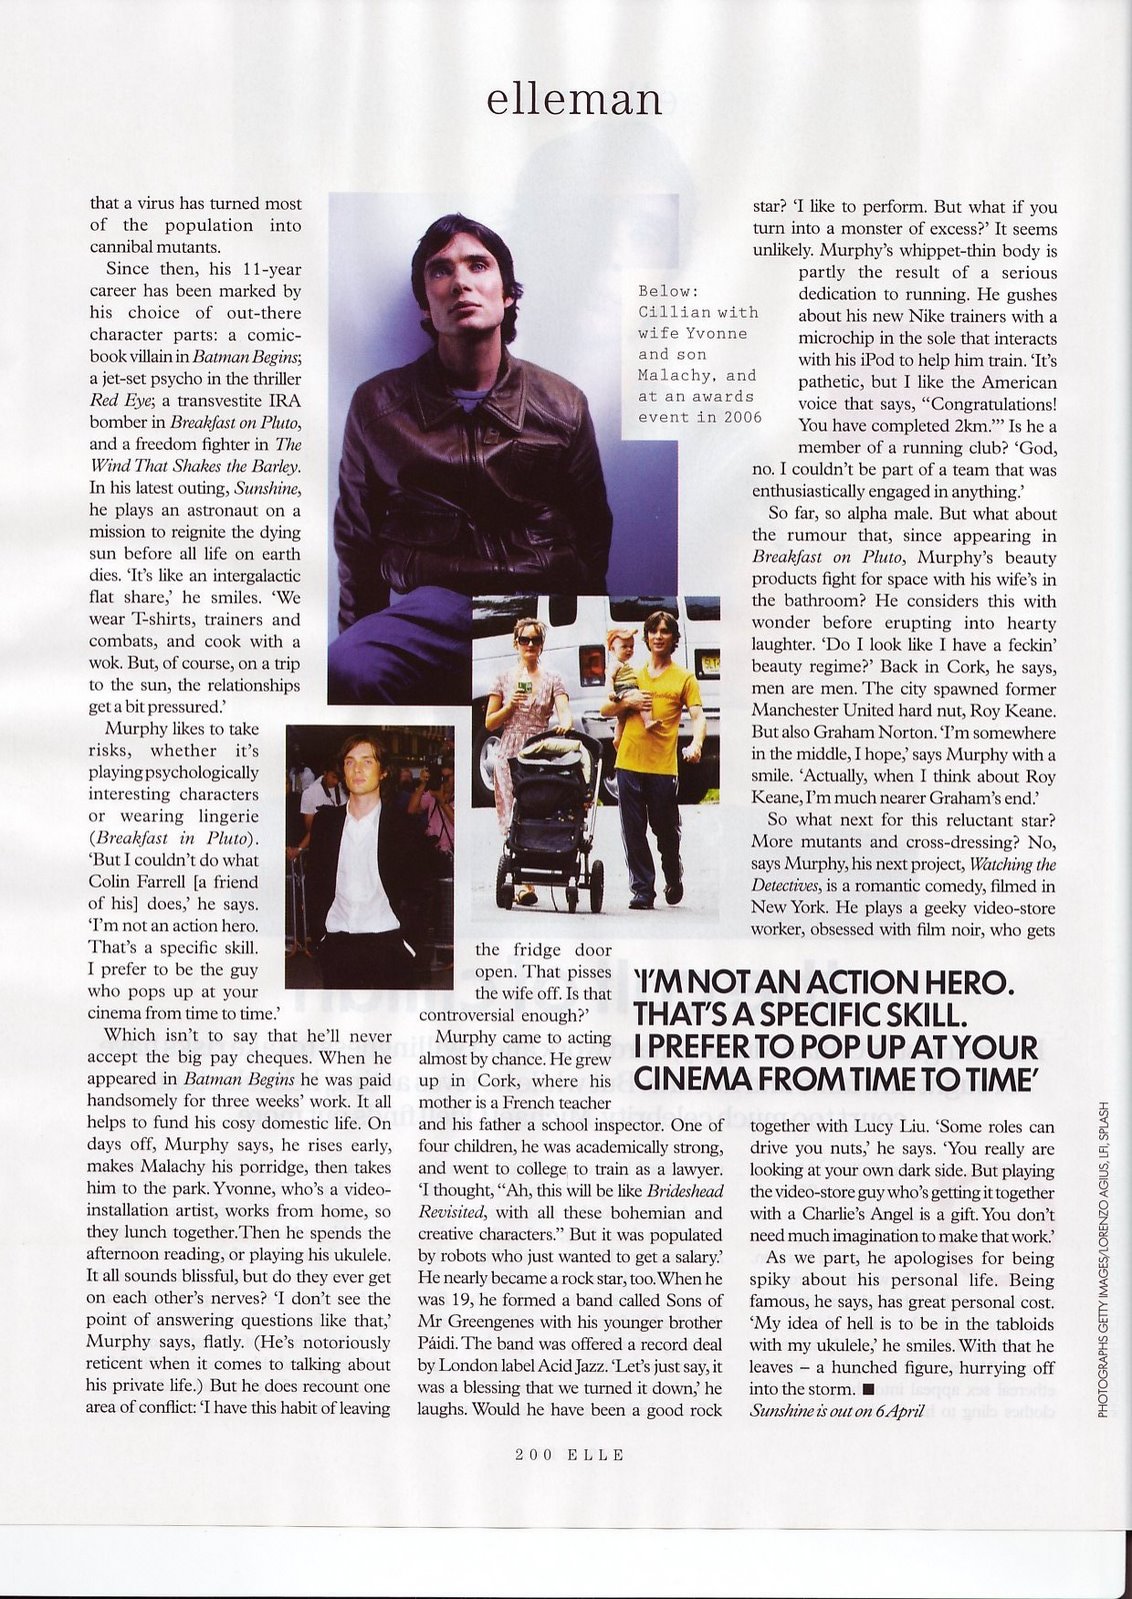 [Cillian+article+page+2.jpg]